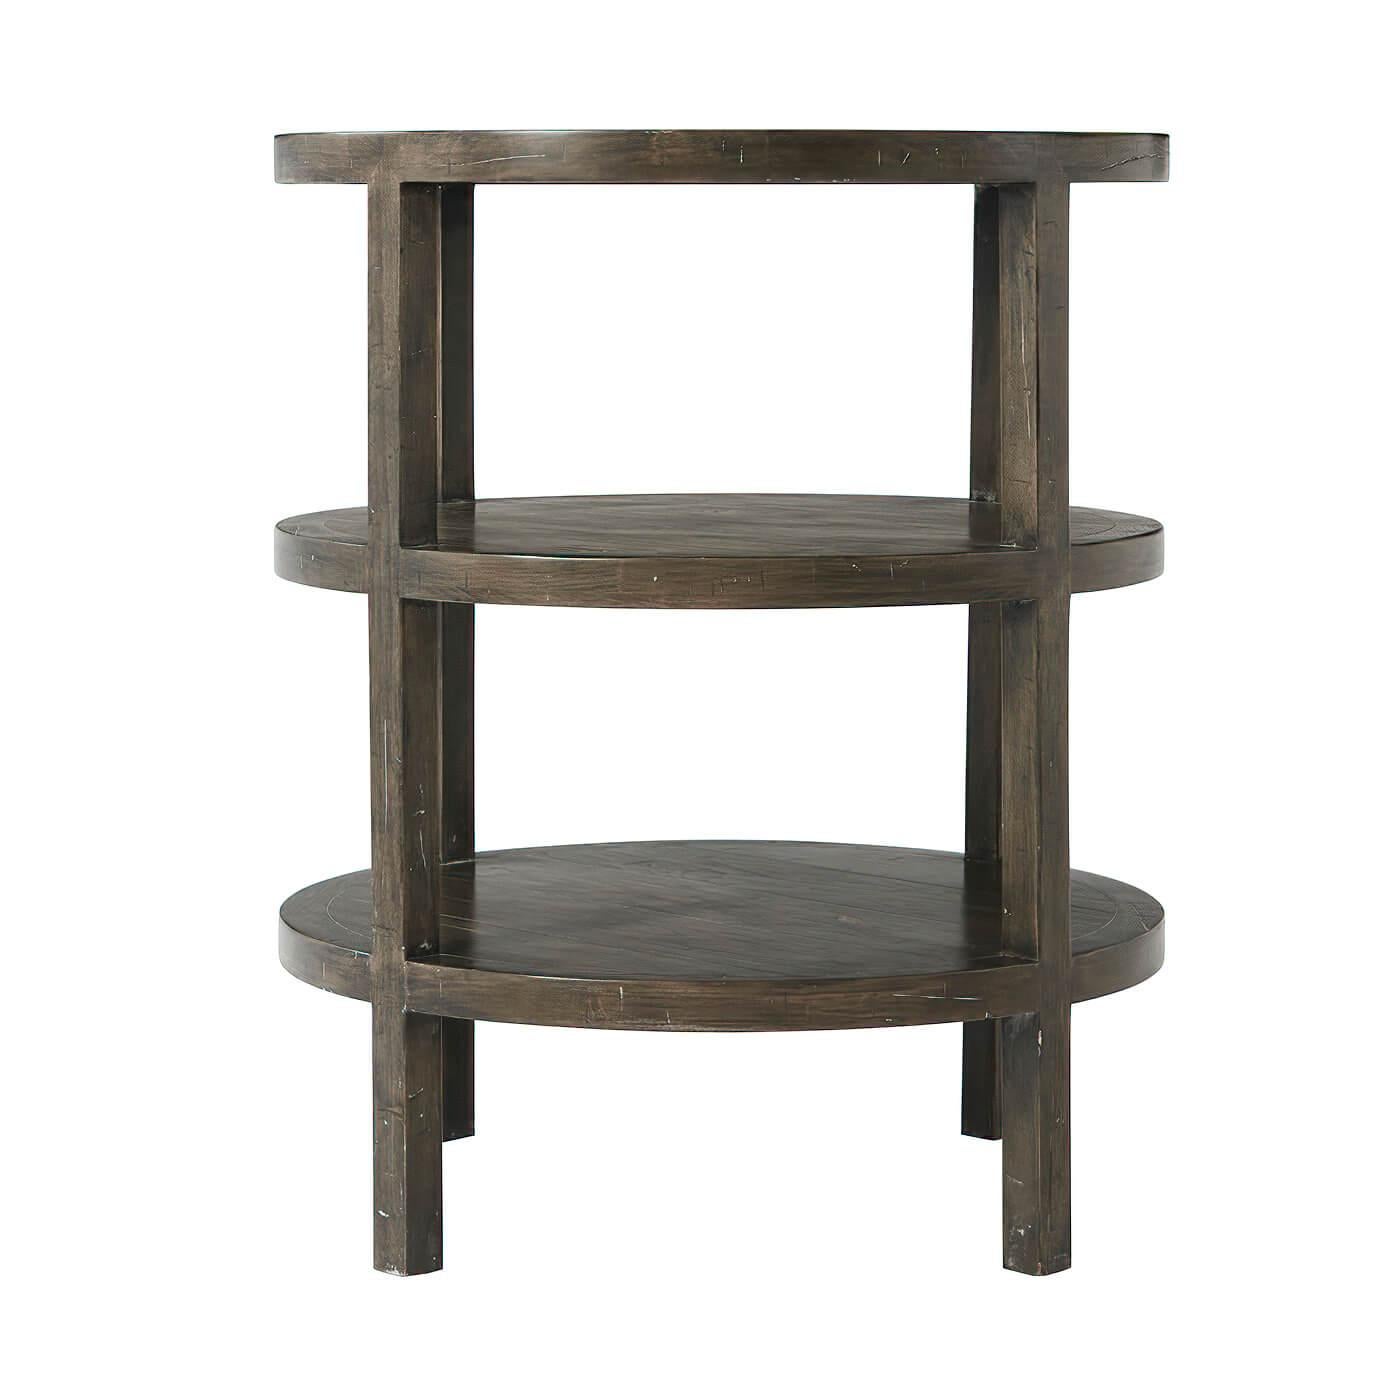 Modern three tier round lamp table with a weathered Cocoa finish.

Dimensions: 23